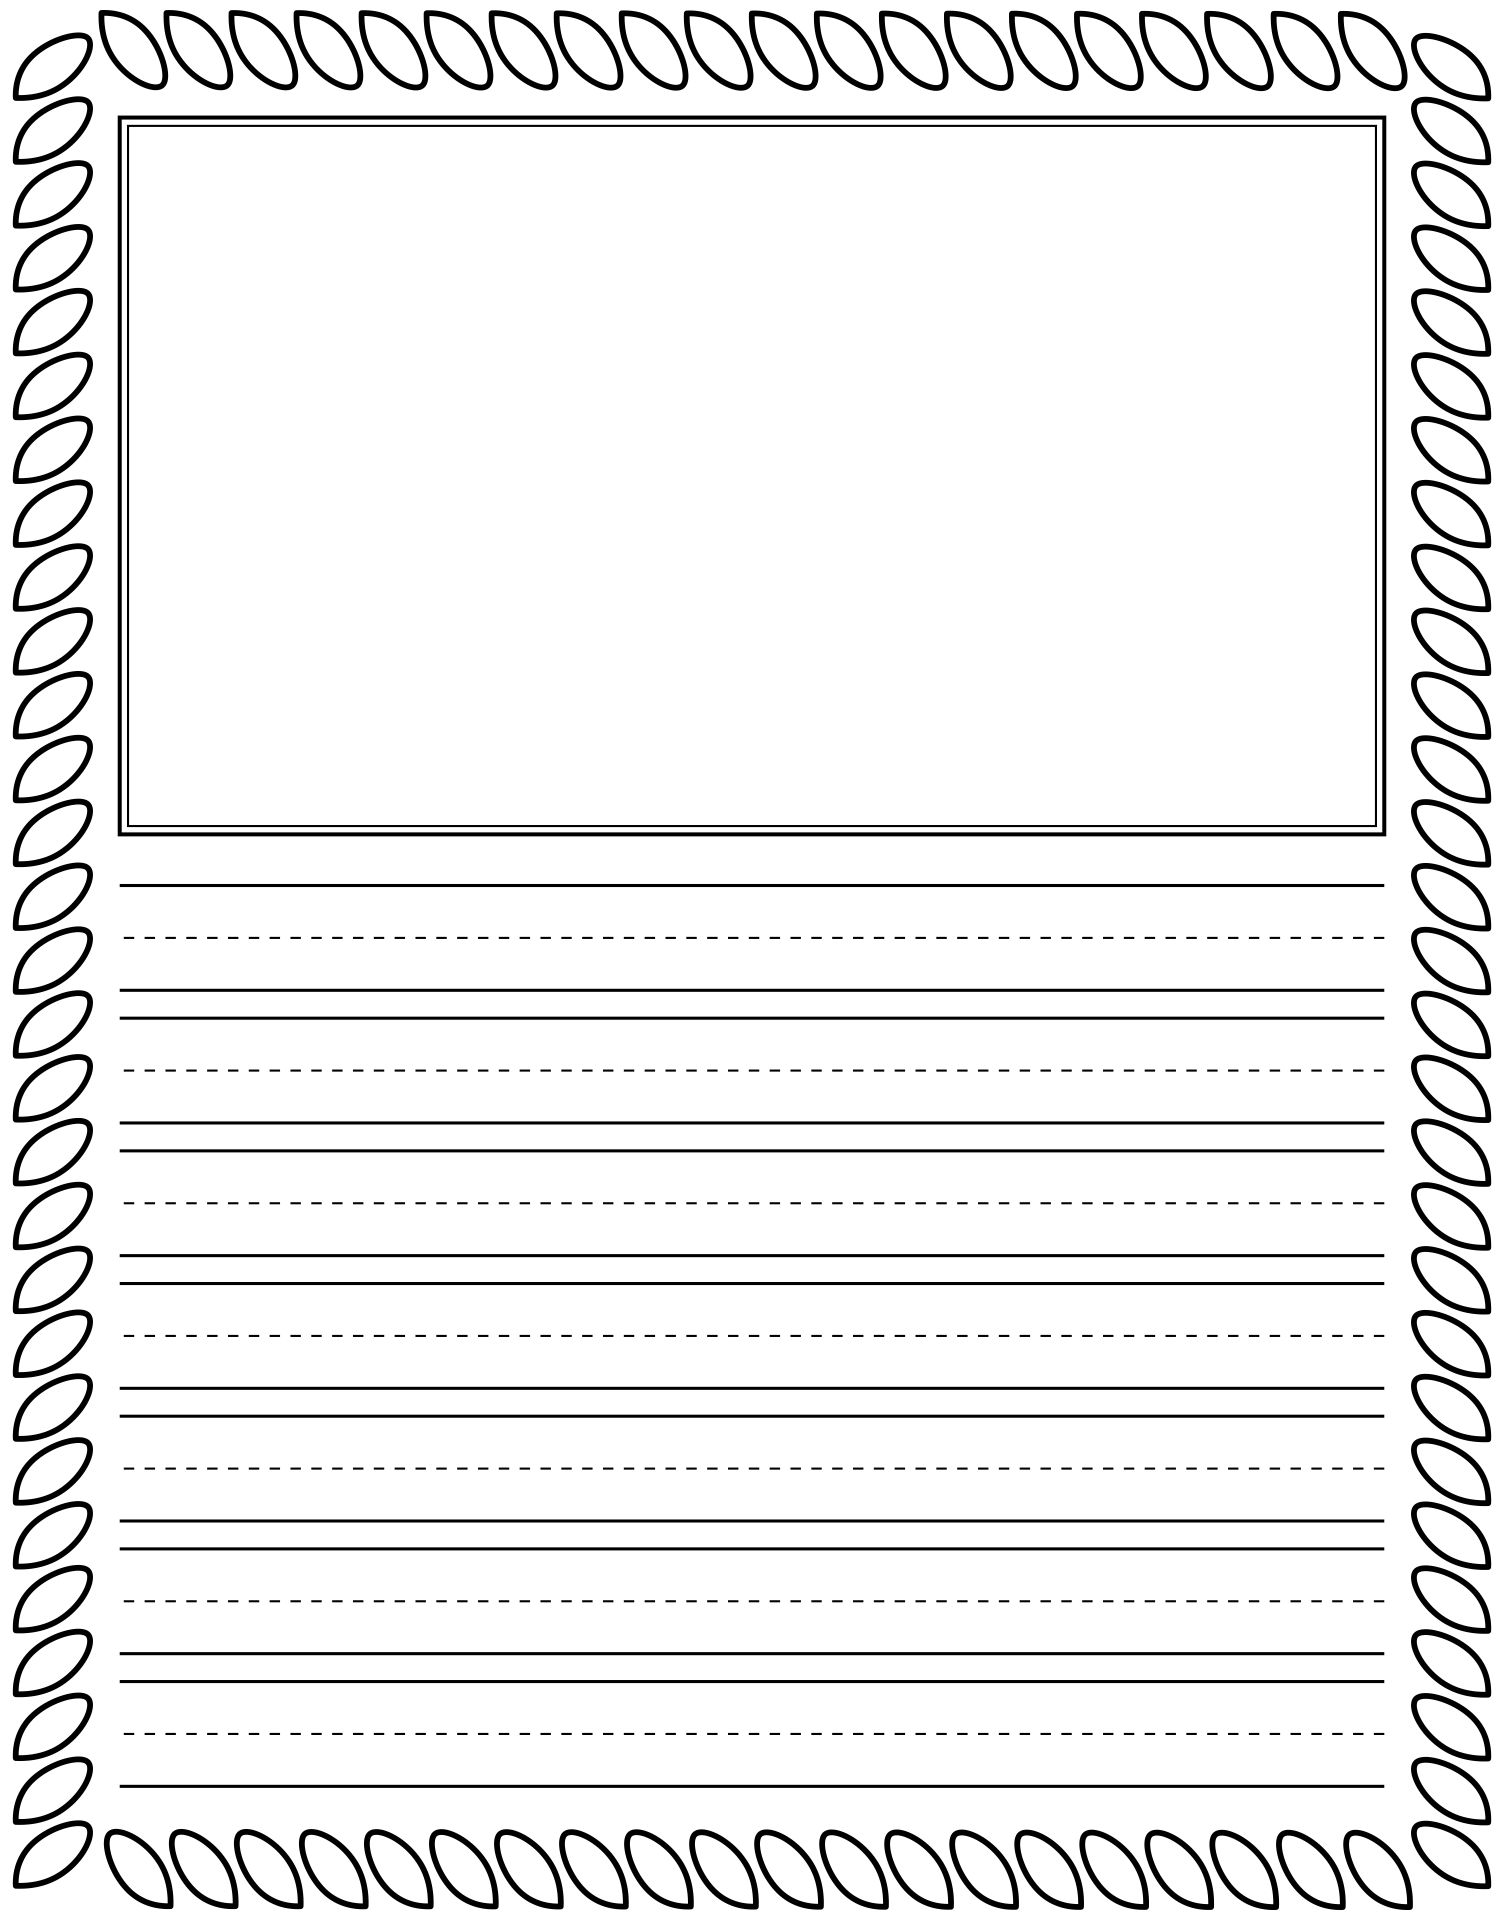 Printable Lined Writing Paper With Drawing Box